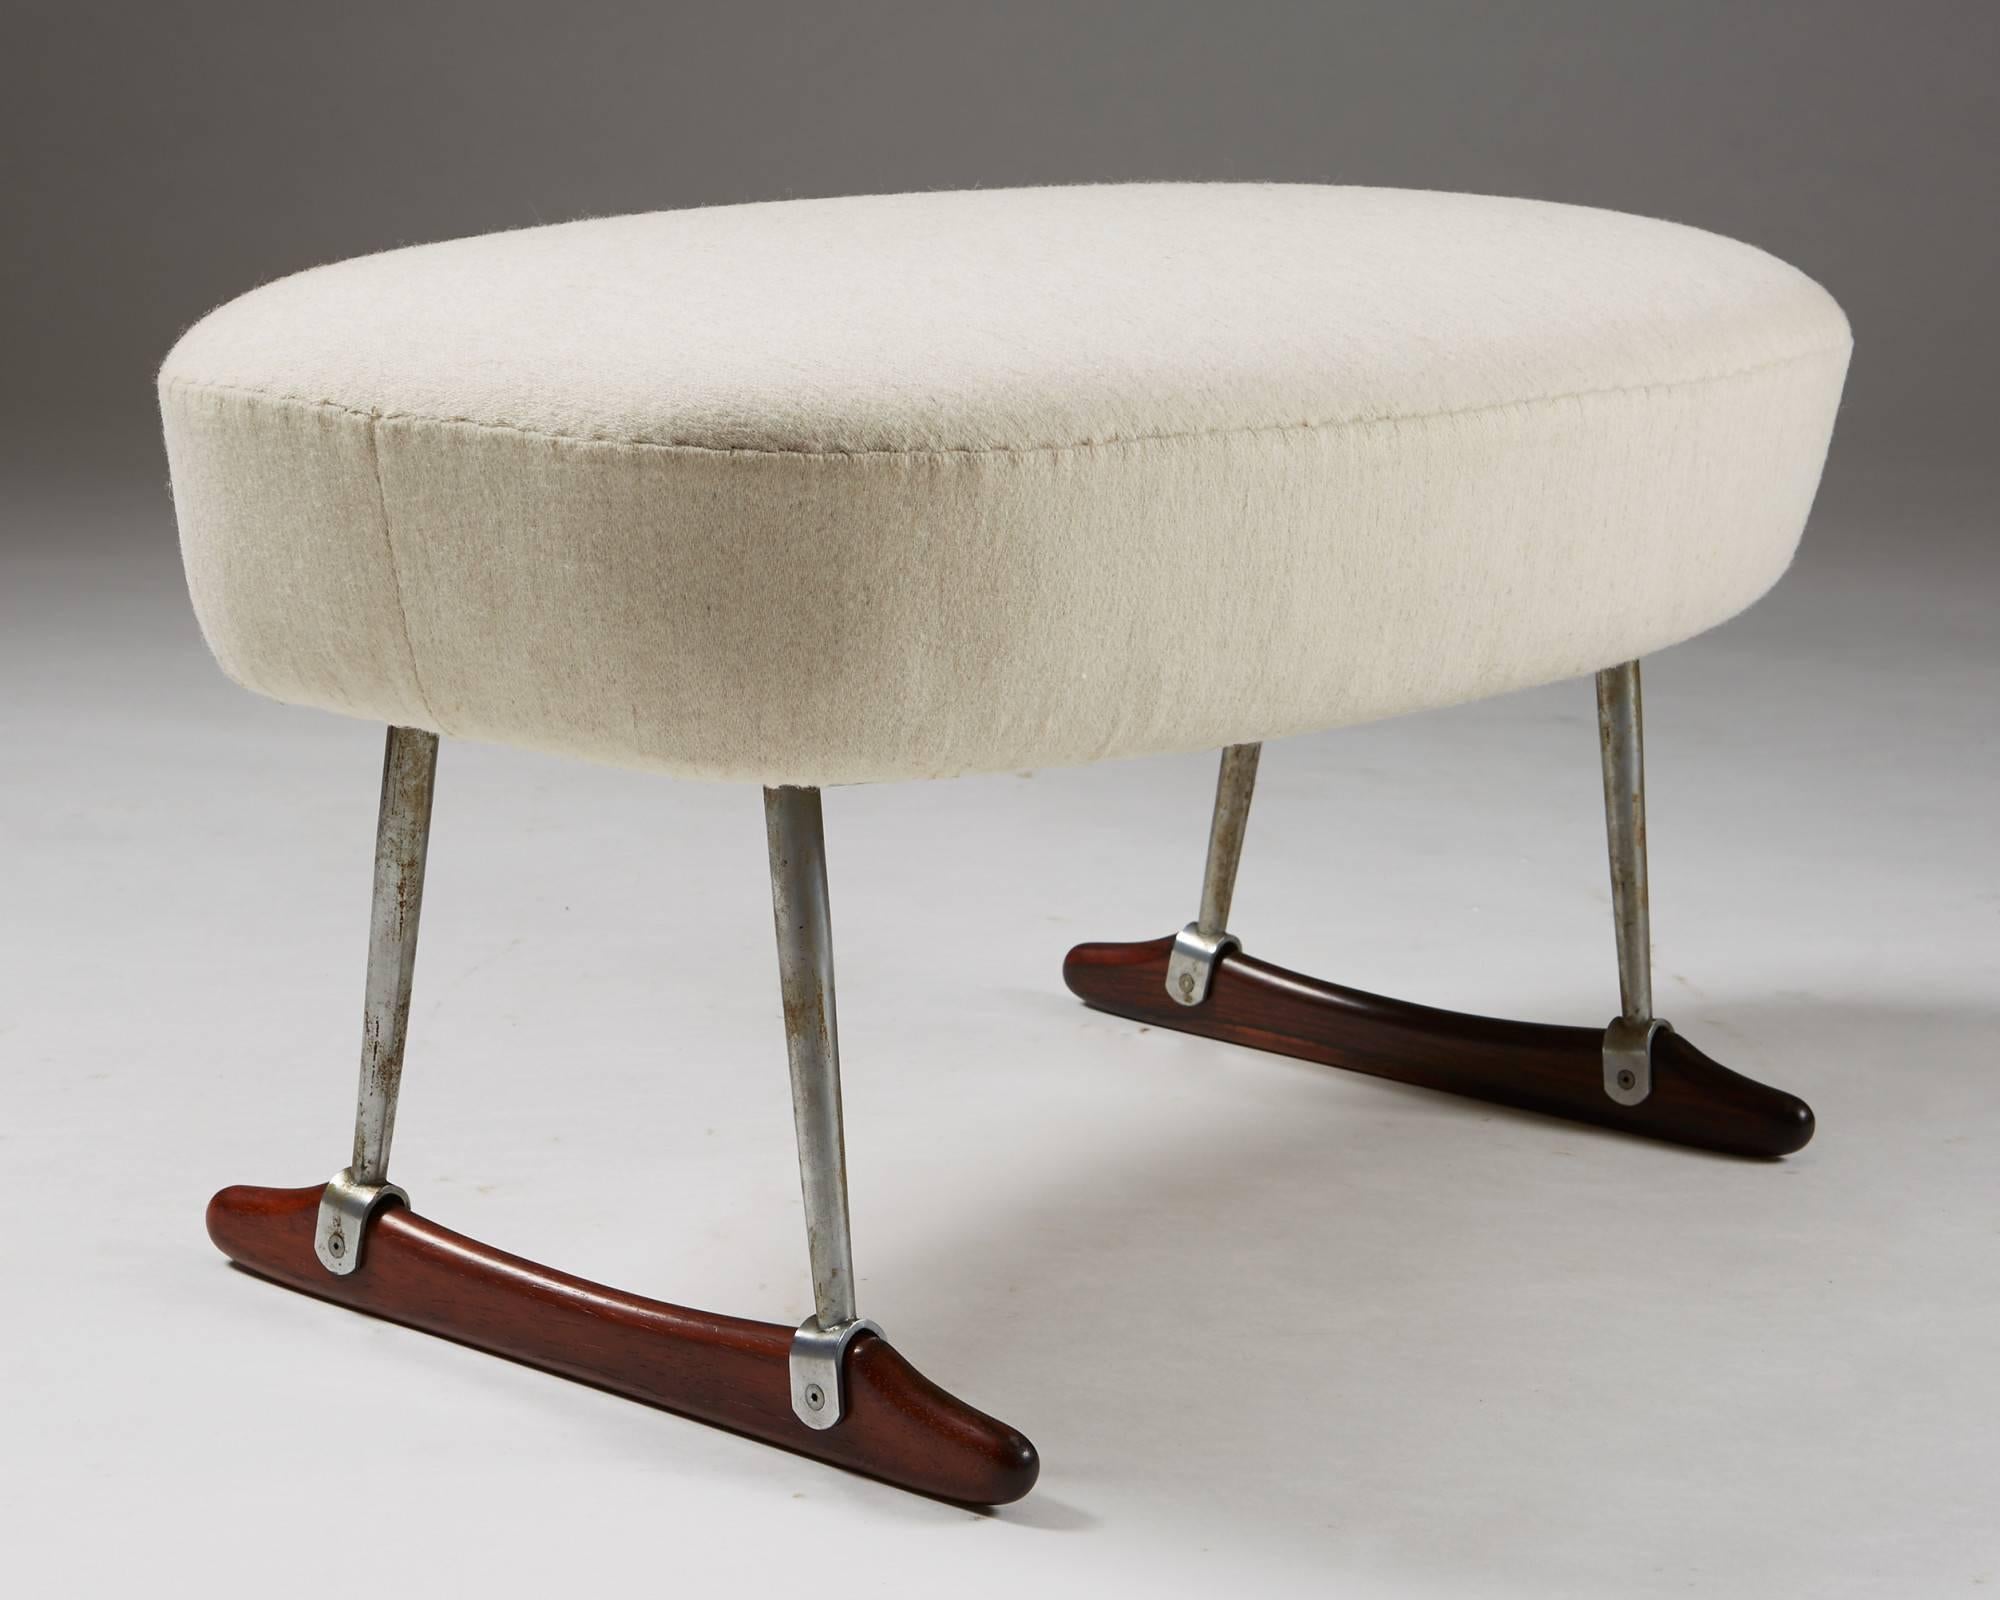 Steel Sleigh Chair and footstool by Børge Mogensen for Tage M Christensen & Co, 1953 For Sale